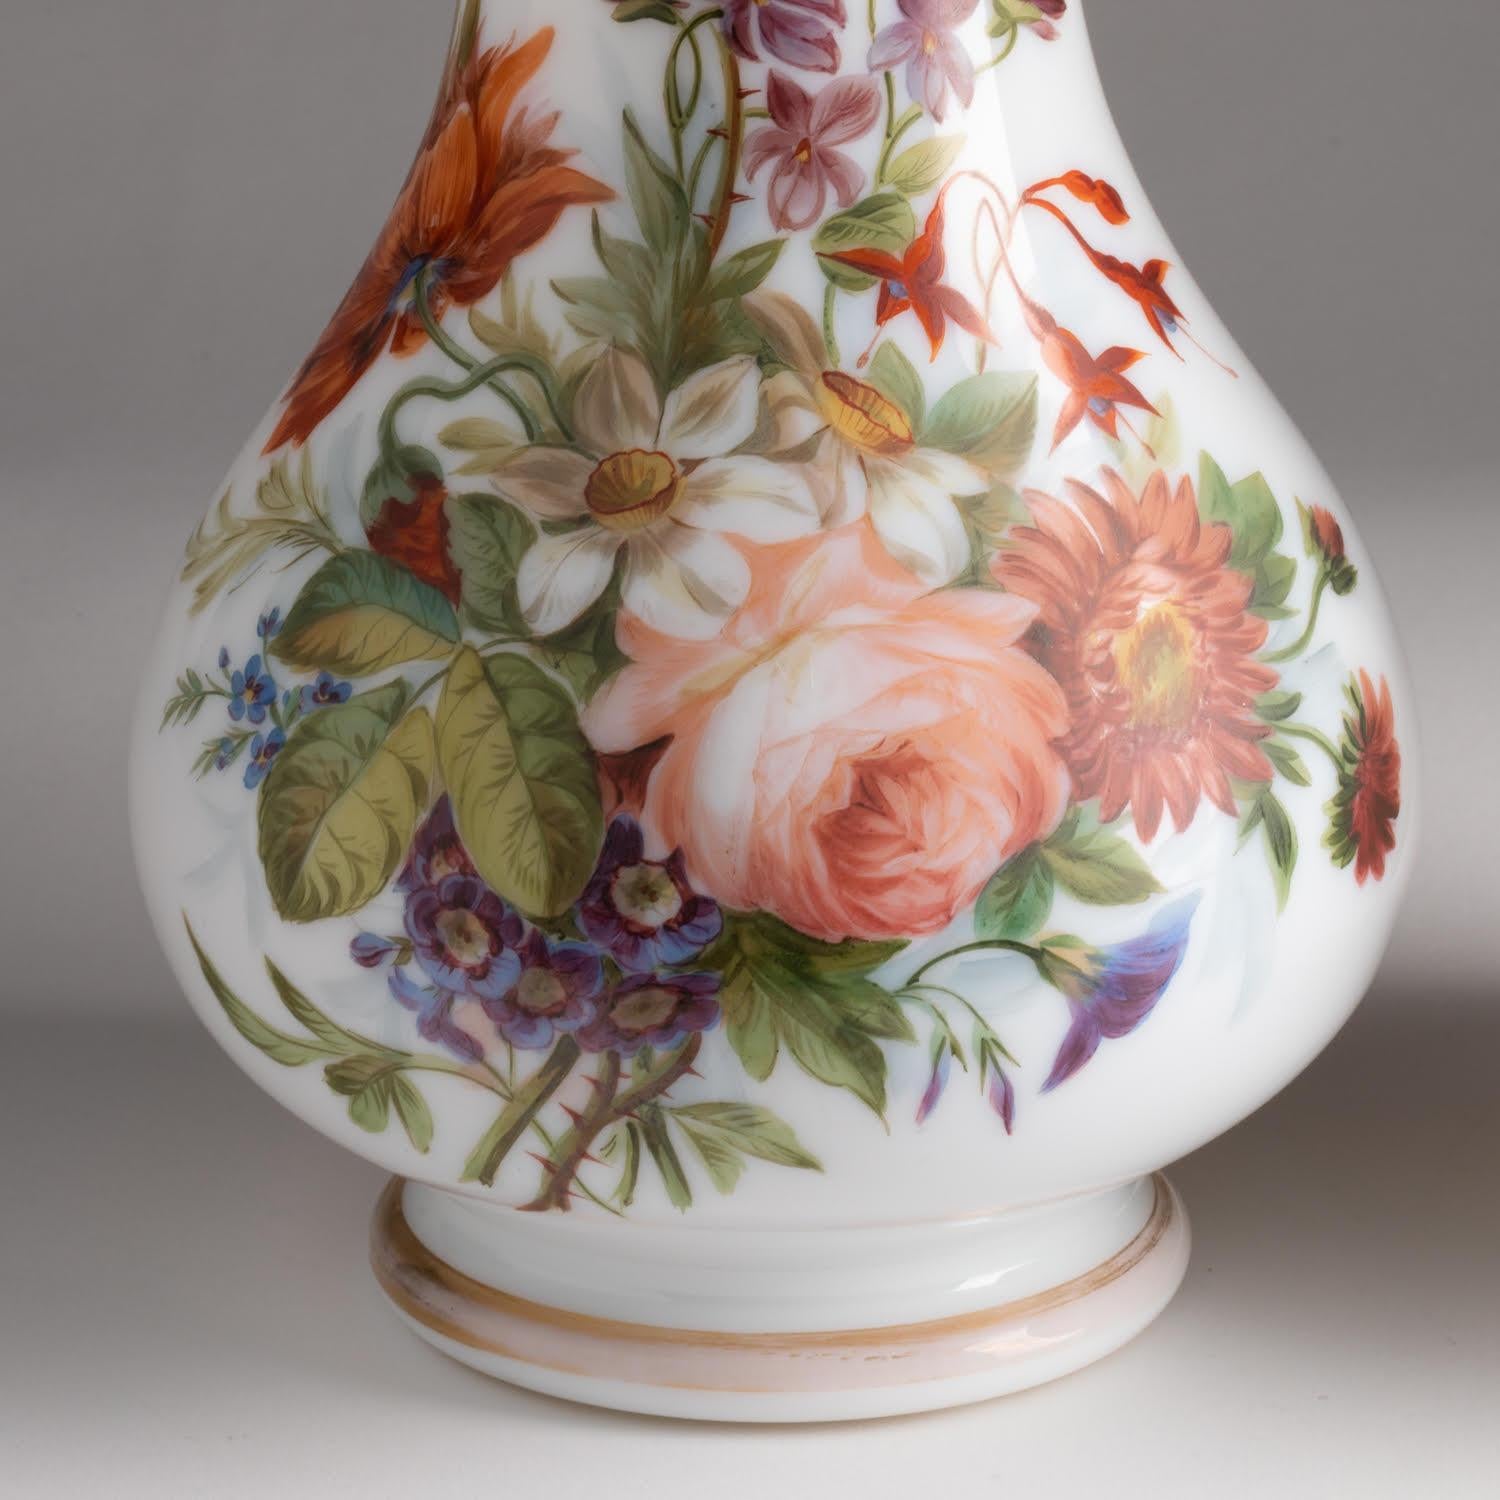 Napoleon III Pair of Opaline Vases Painted with Floral Motifs, 19th Century. For Sale